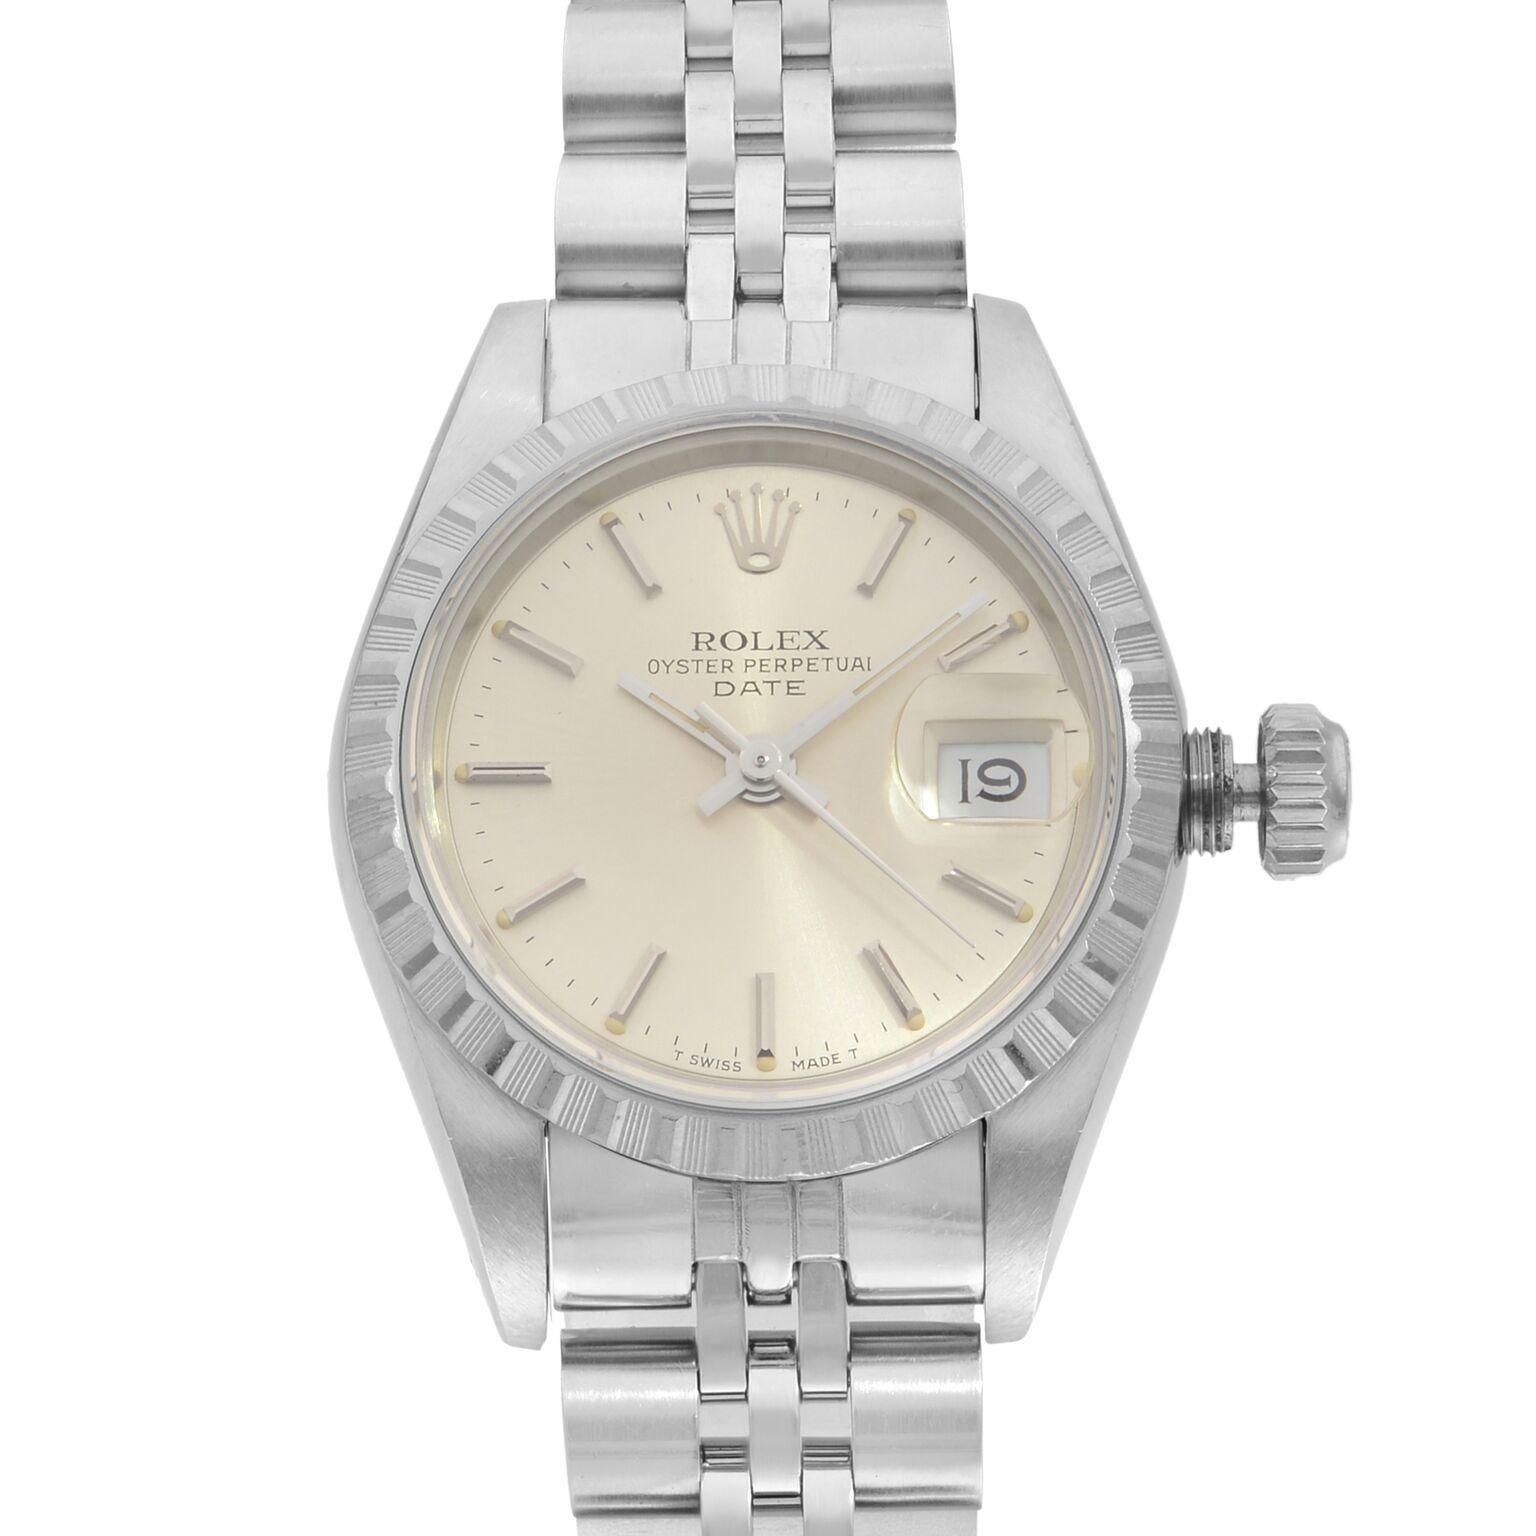 This pre-owned Rolex Date 69240 is a beautiful Ladie's timepiece that is powered by mechanical (automatic) movement which is cased in a stainless steel case. It has a round shape face, date indicator dial and has hand sticks style markers. It is